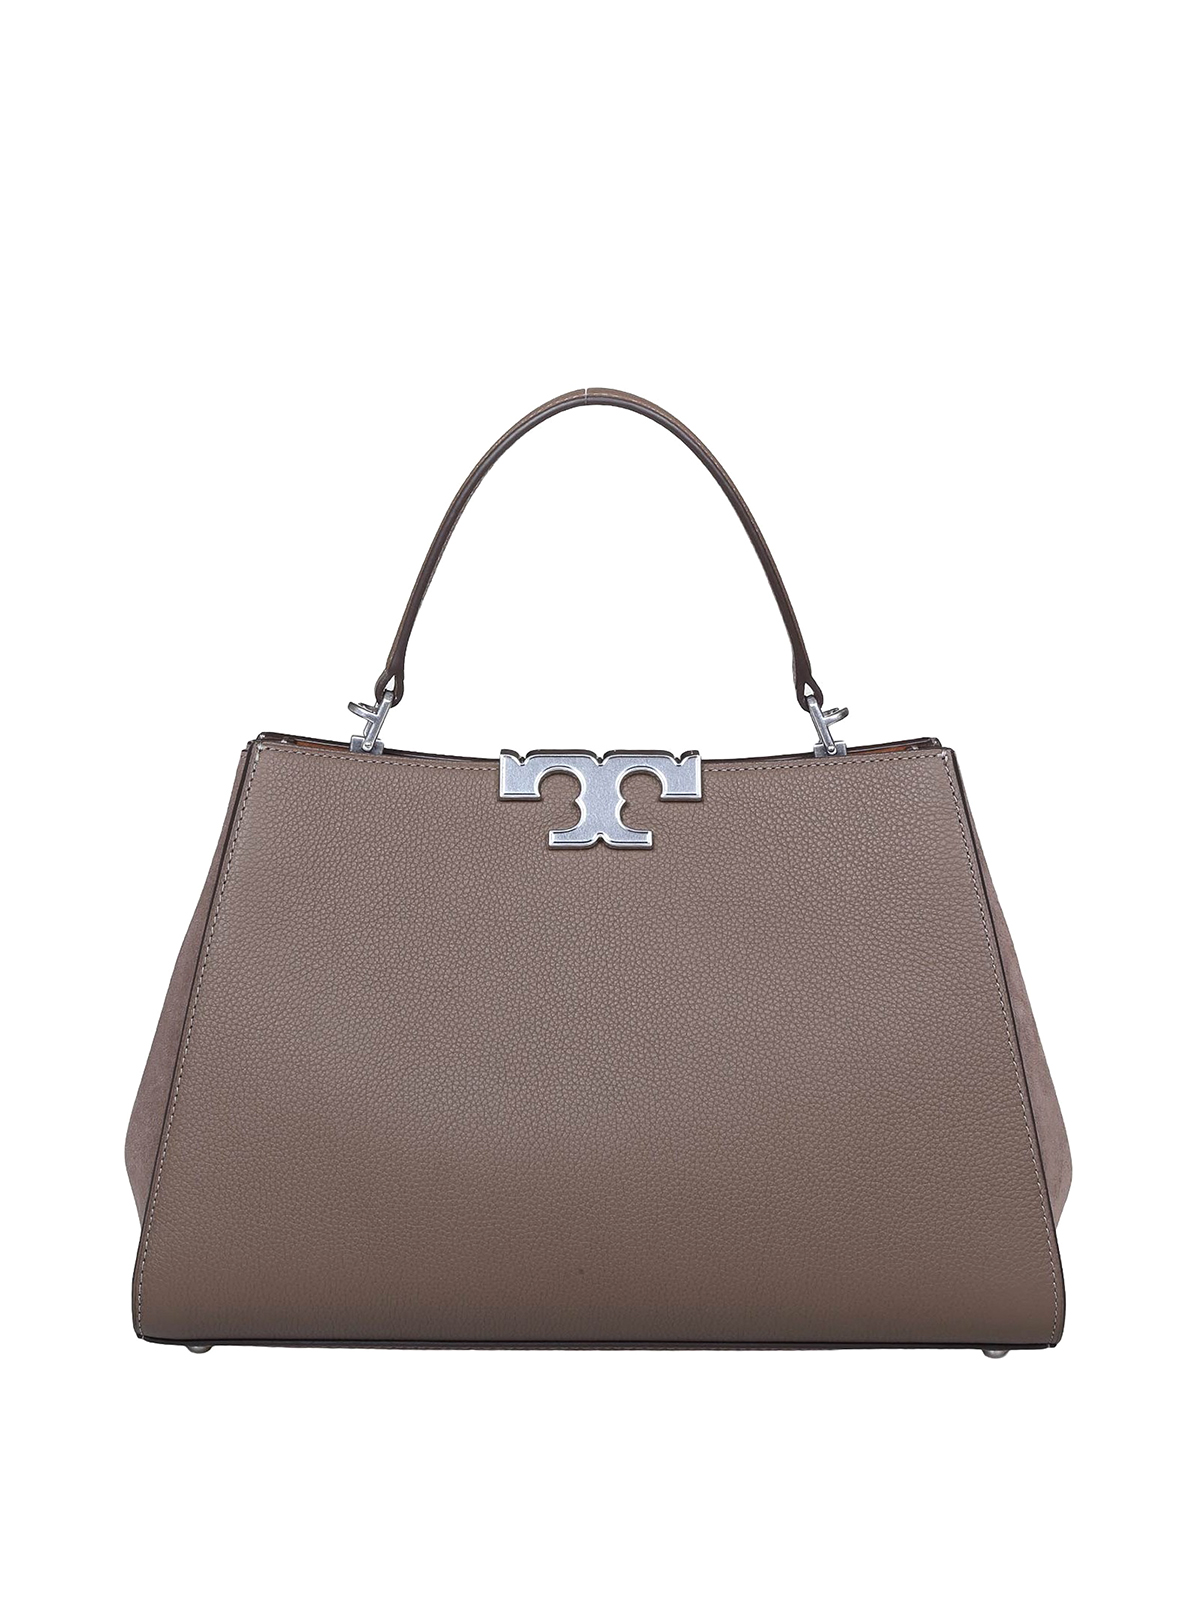 Tory Burch Eleanor Pebbled In Taupe Leather In Brown